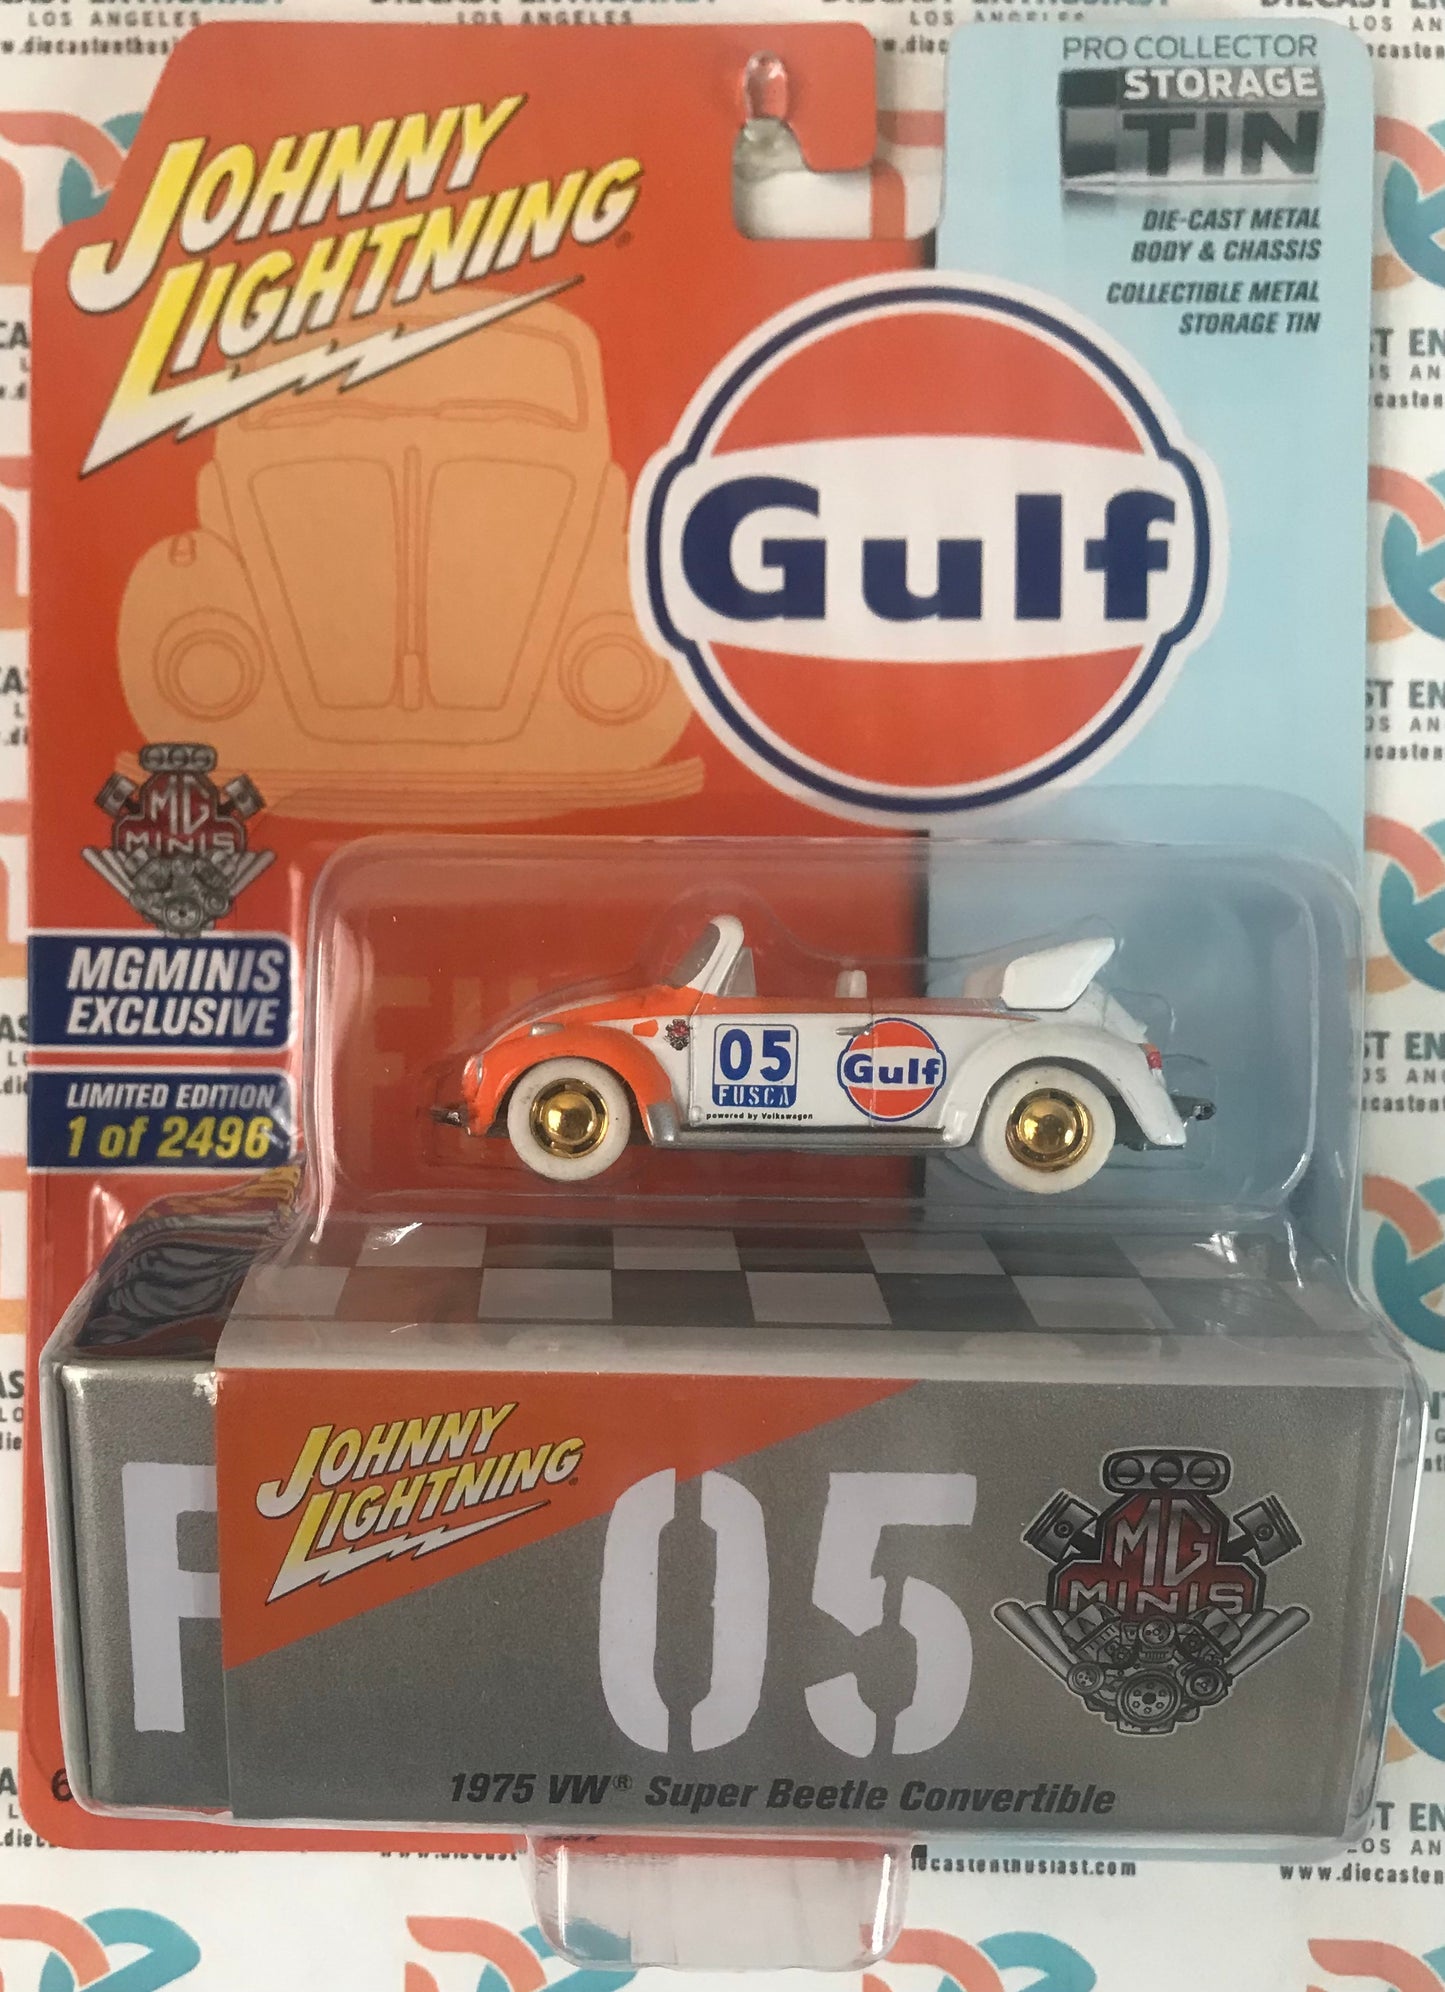 CHASE Johnny Lightning Exclusives Storage Tin Gulf 1975 VW Super Beetle Convertible 1:64